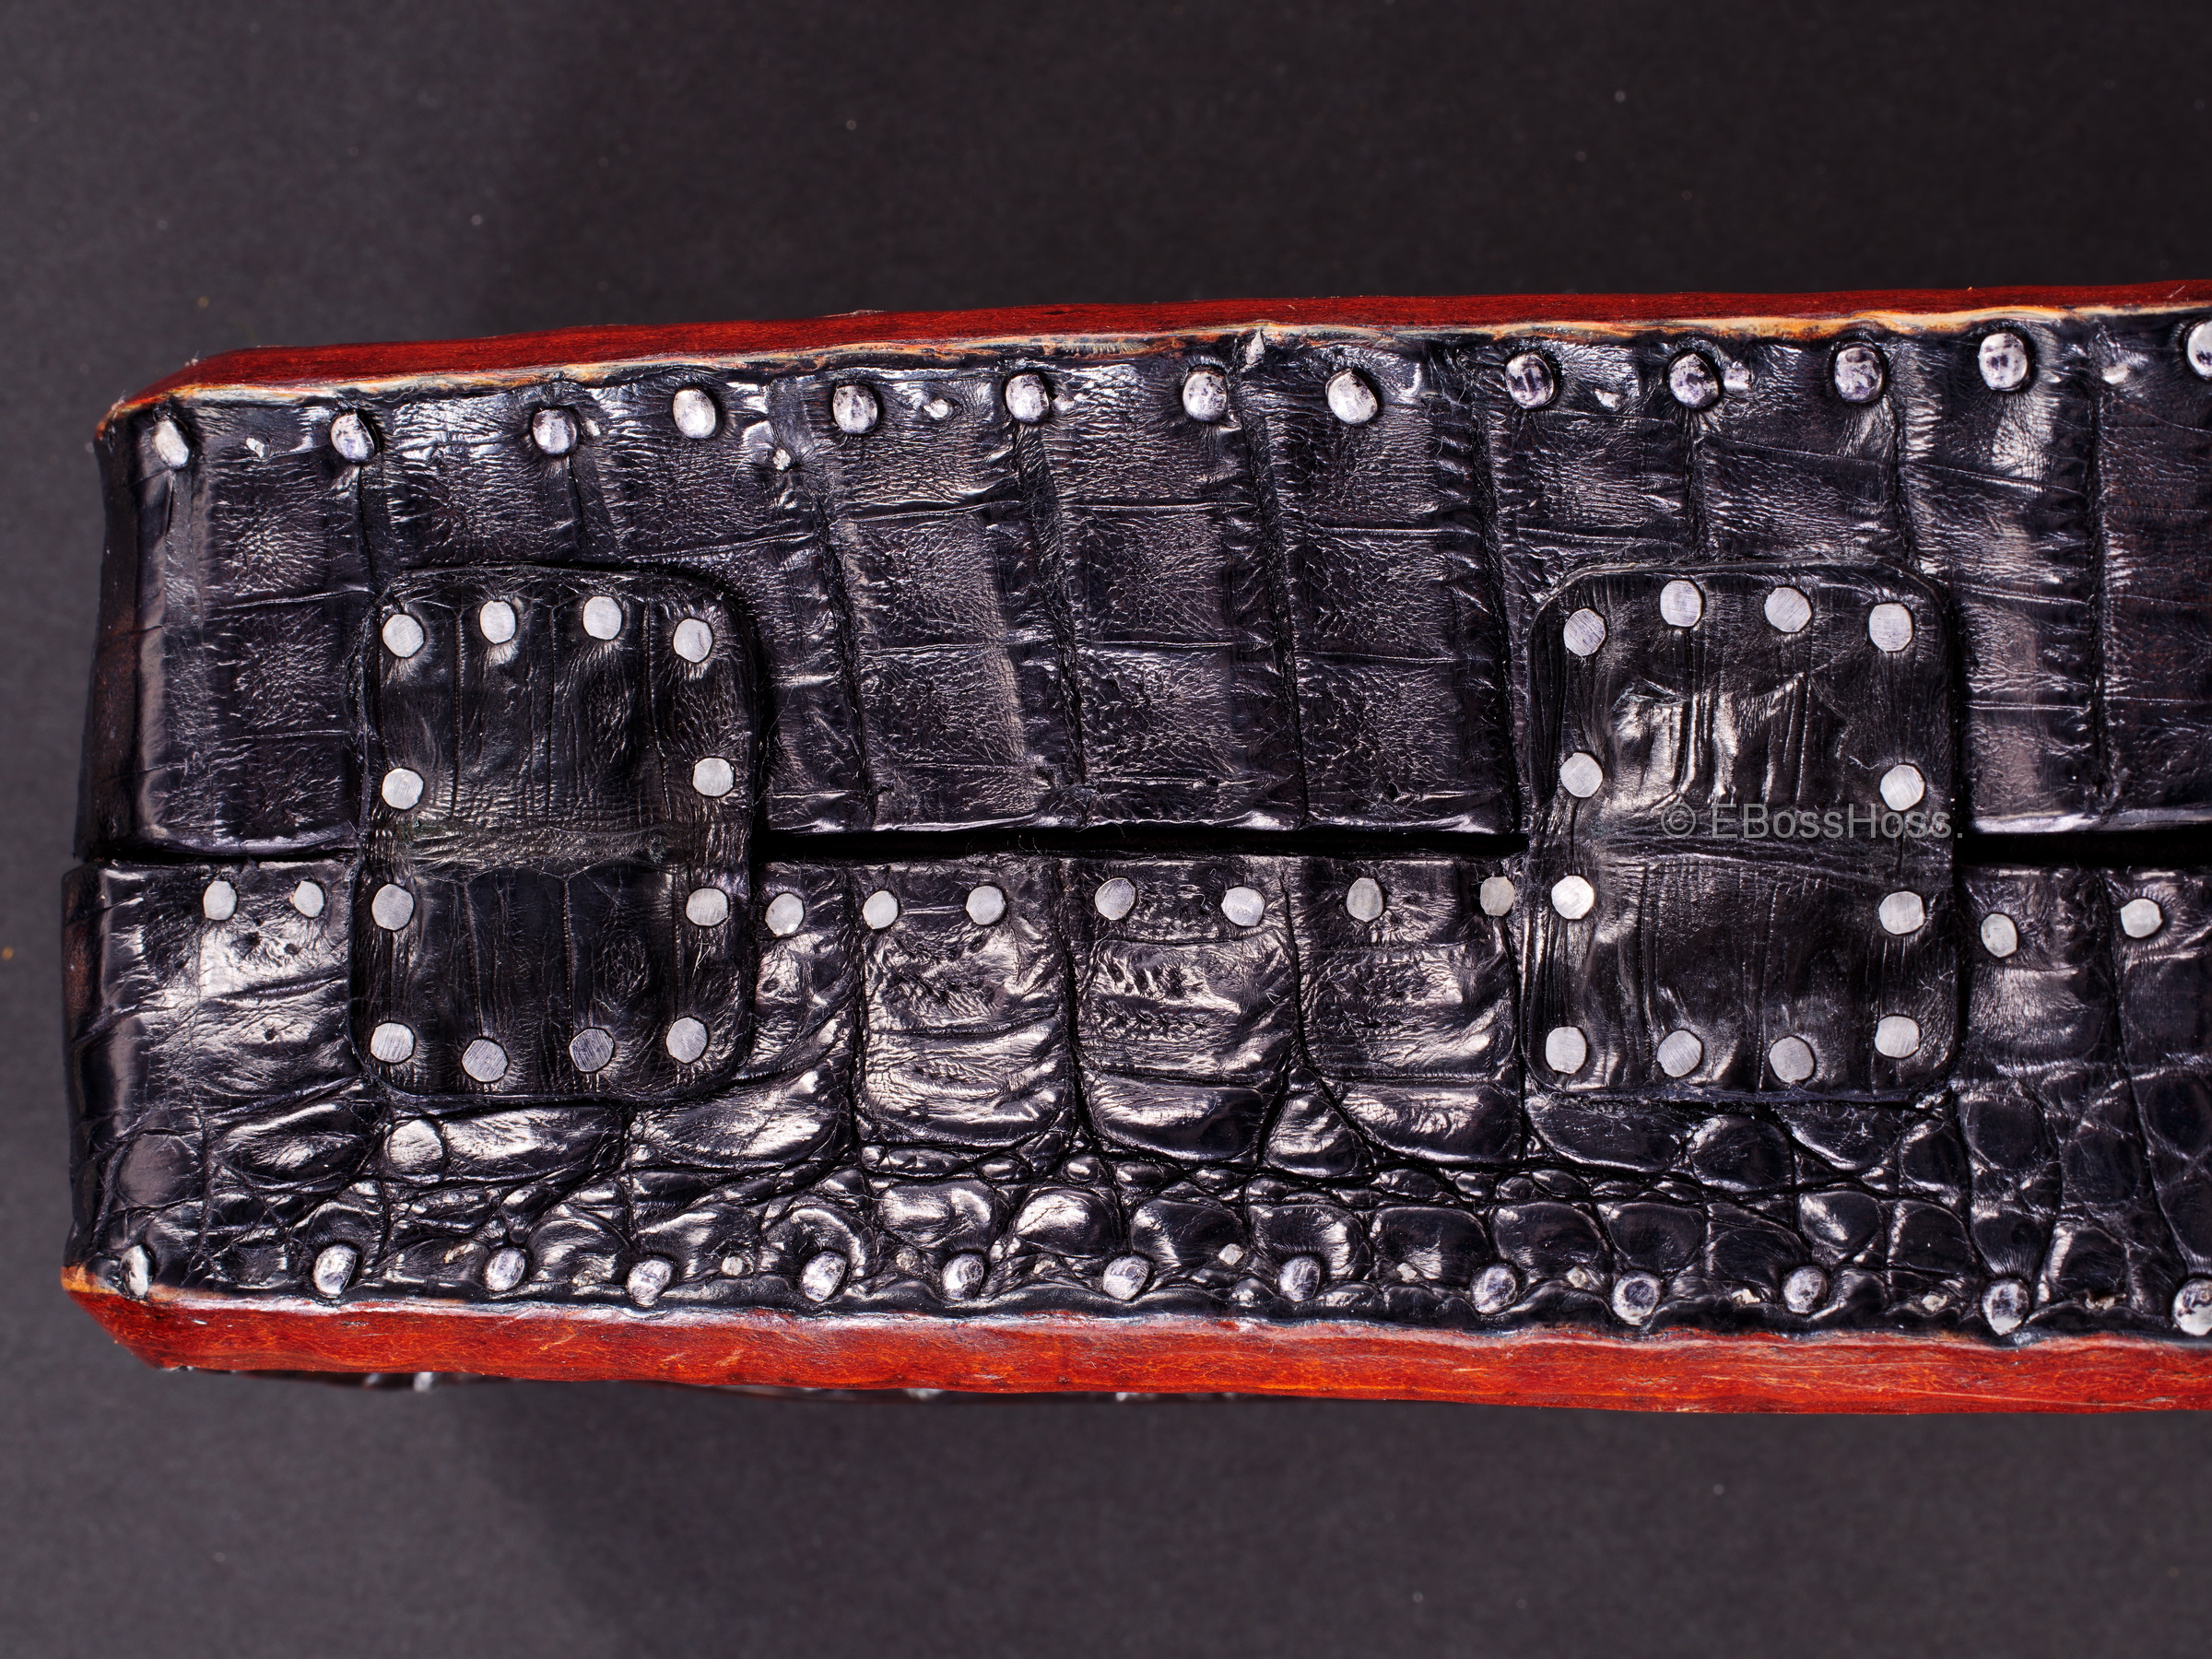 Starlingear Hand-made Alligator Coffin Box with Gator Hinges by Greg Everett, Leathersmith